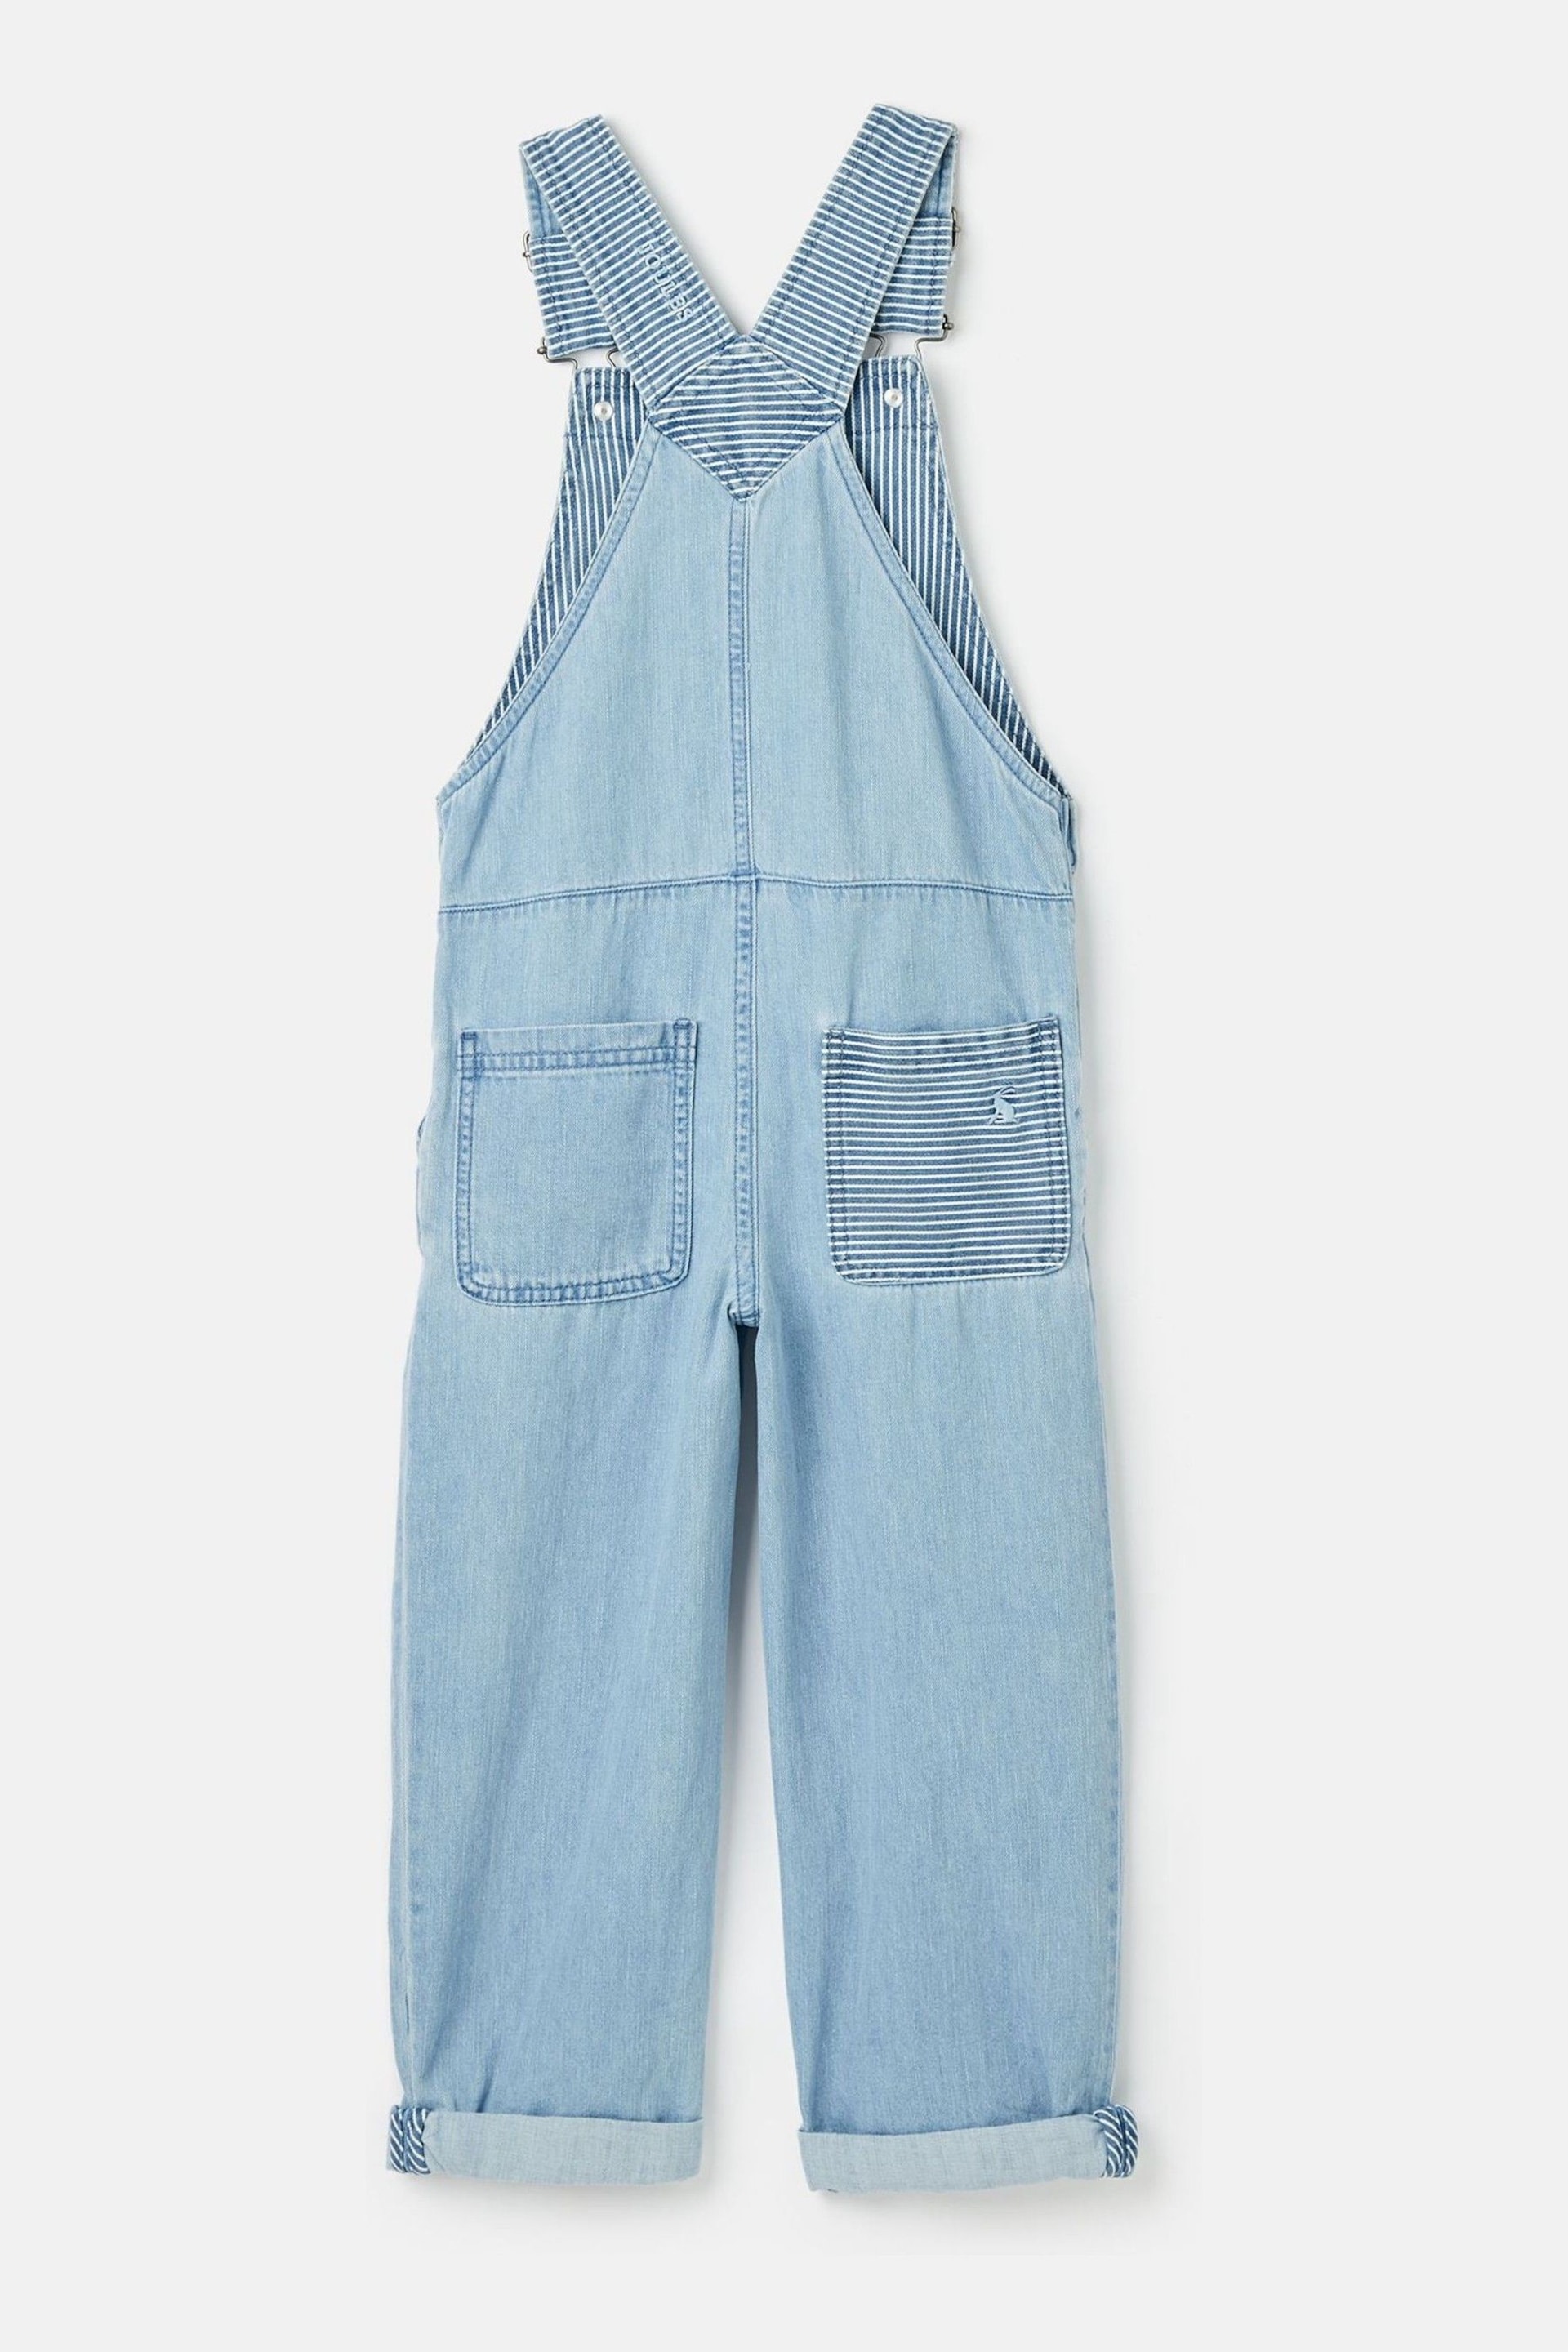 Joules Madeline Blue Chambray Hotch Potch Dungarees - Image 2 of 5